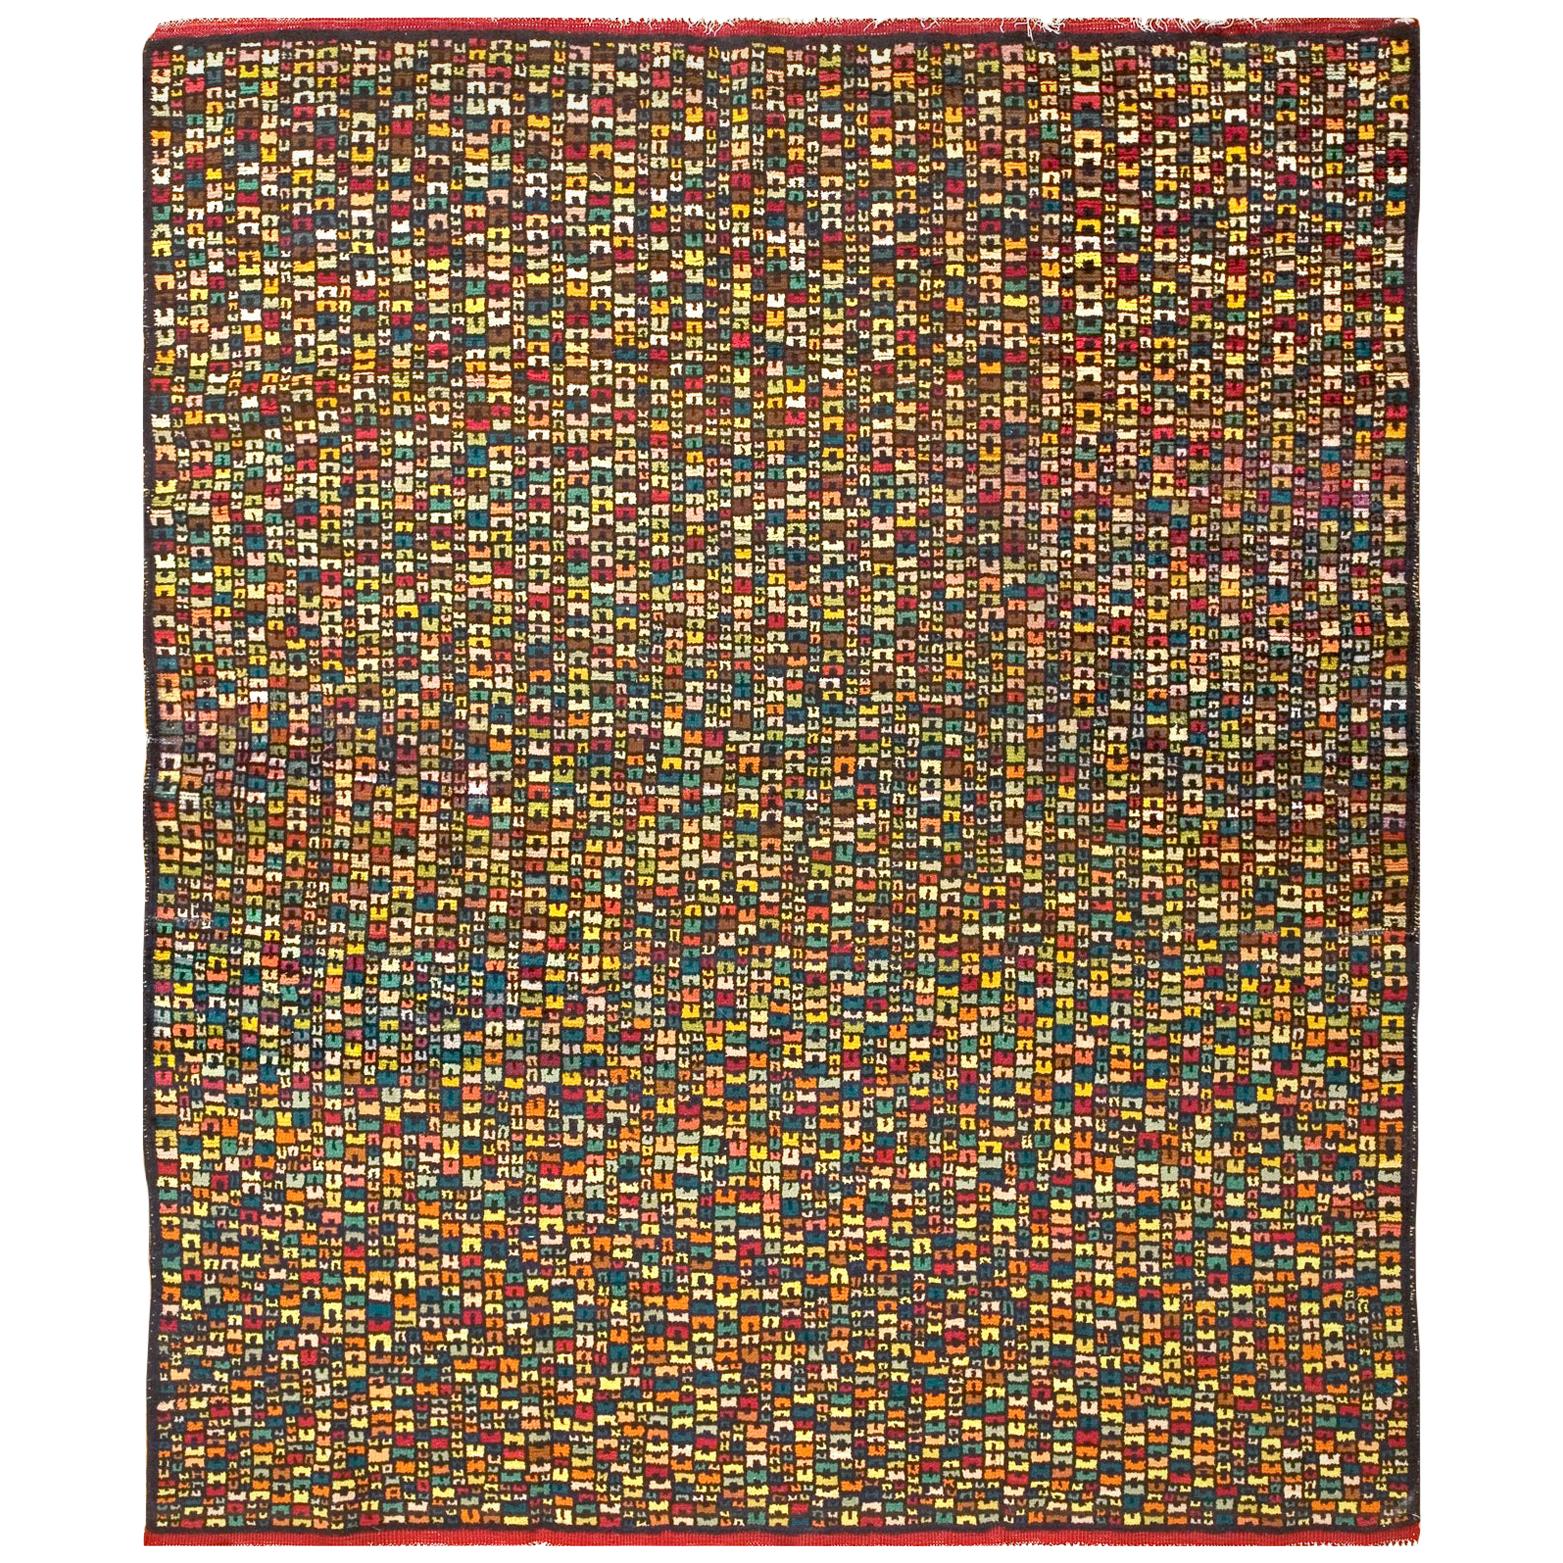 Early 20th Century Jerusalem Carpet in Bauhaus Style ( 5'6" x 6'8" - 168 x 203 ) For Sale